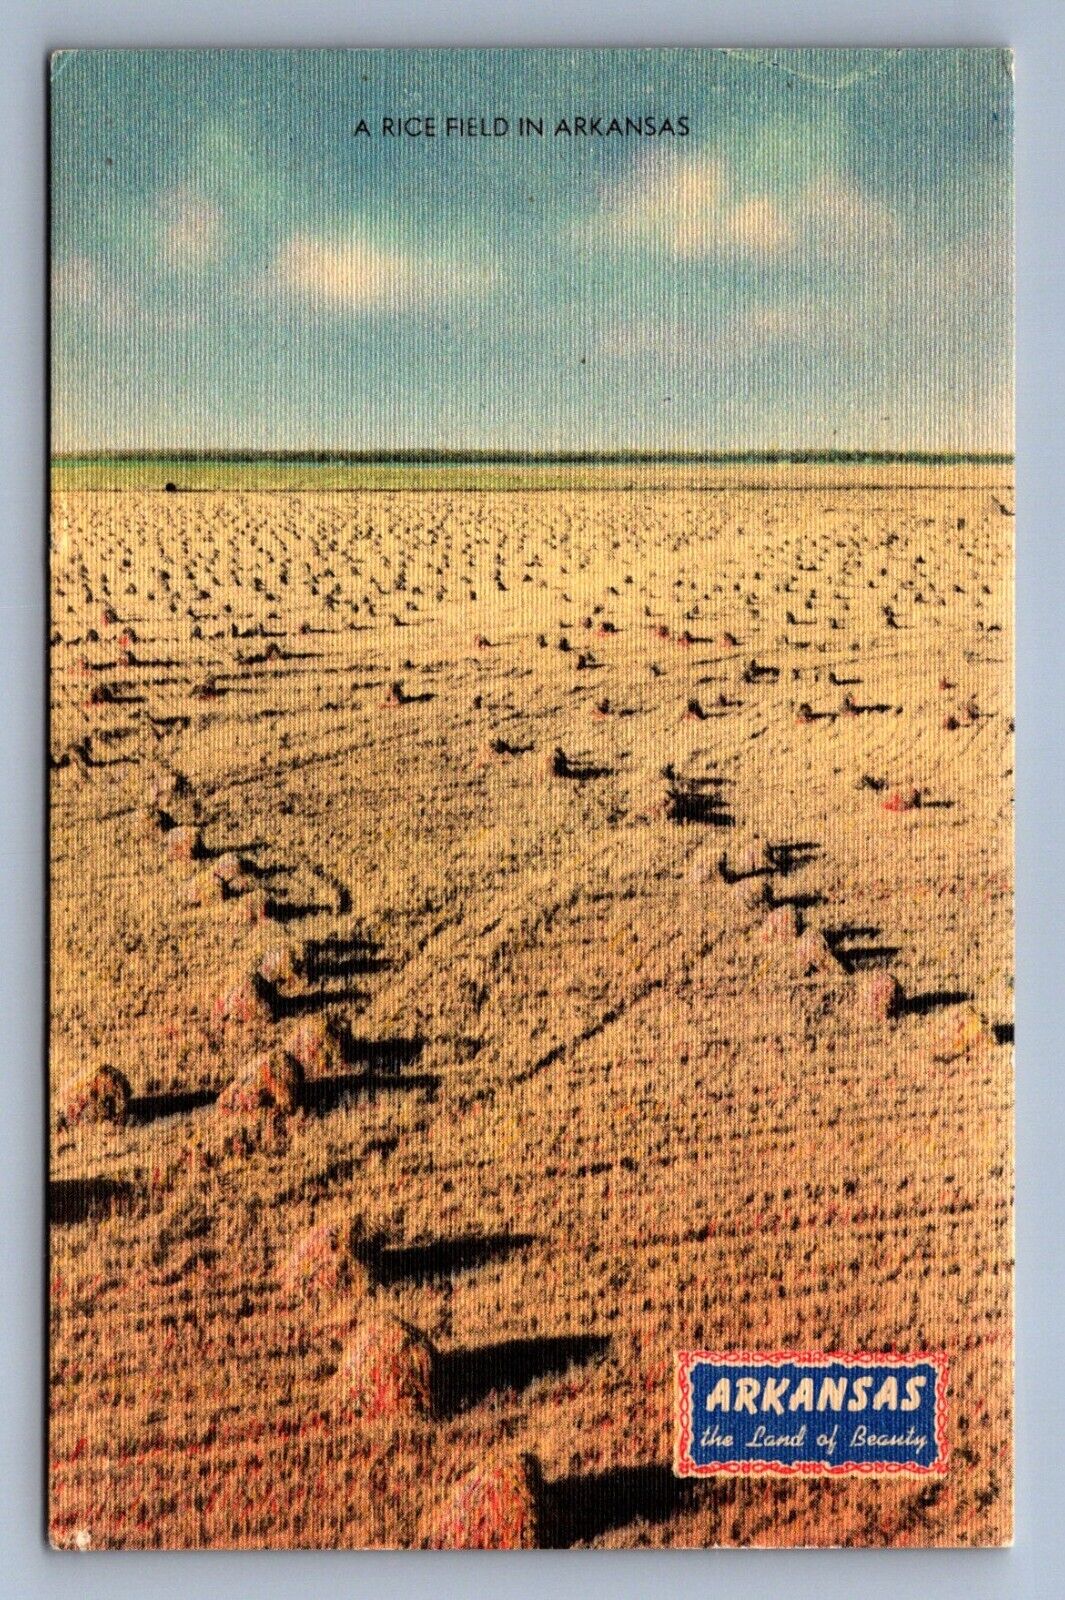 Postcard Vintage Rice Field In Arkansas Farming Agriculture Crop Land Of Beauty